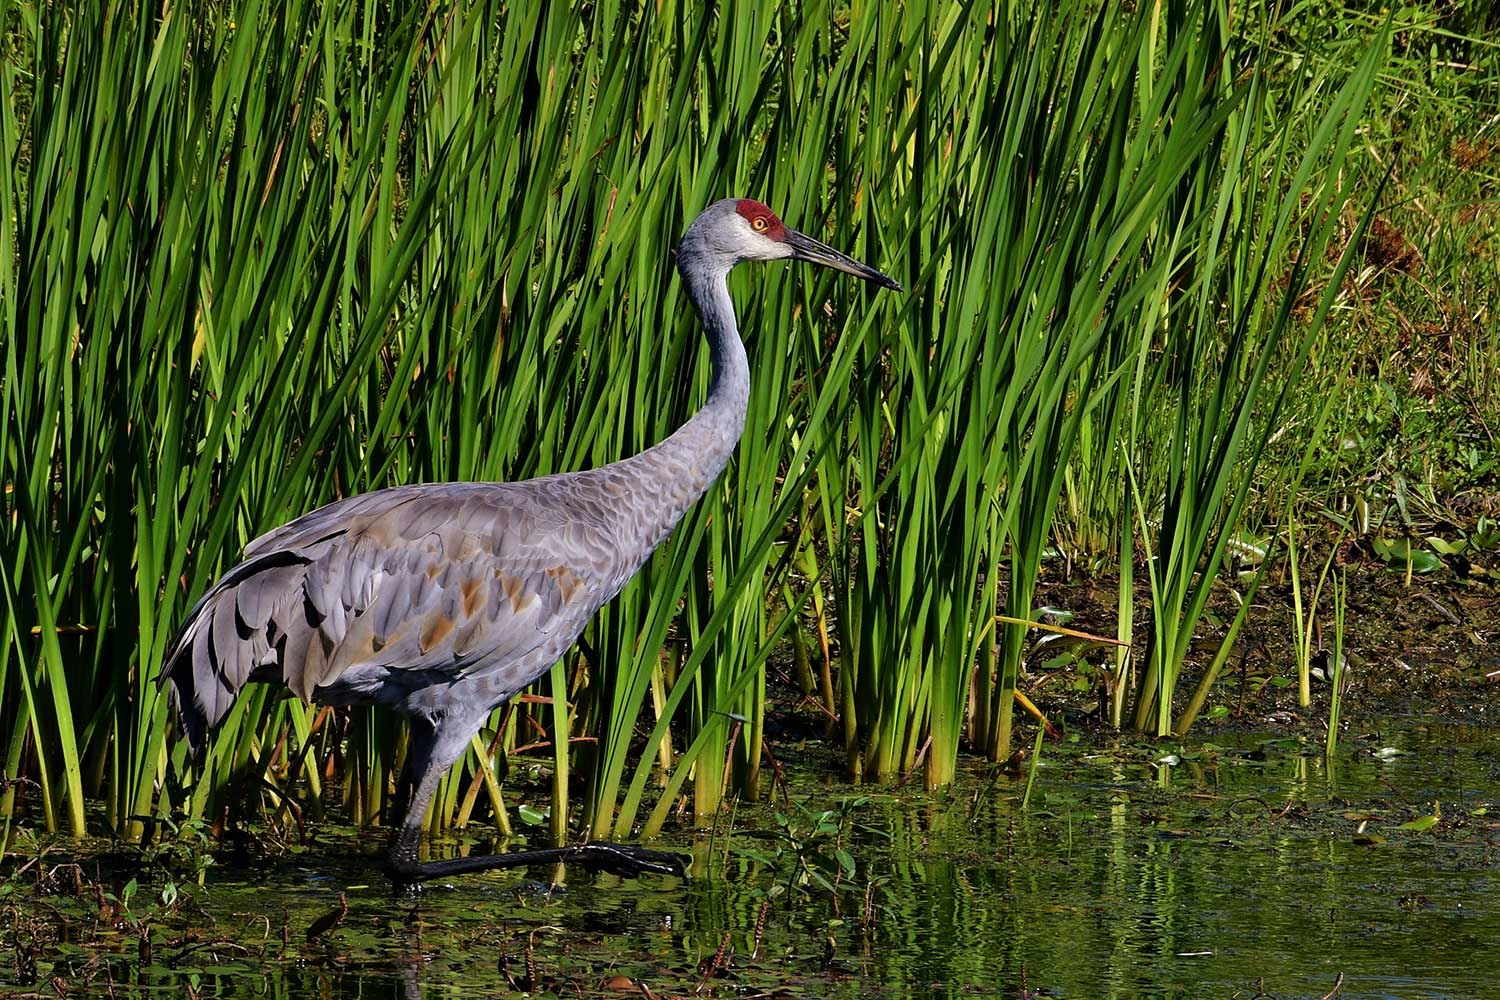 A sandhill crane in shallow water with tall grasses in the background.